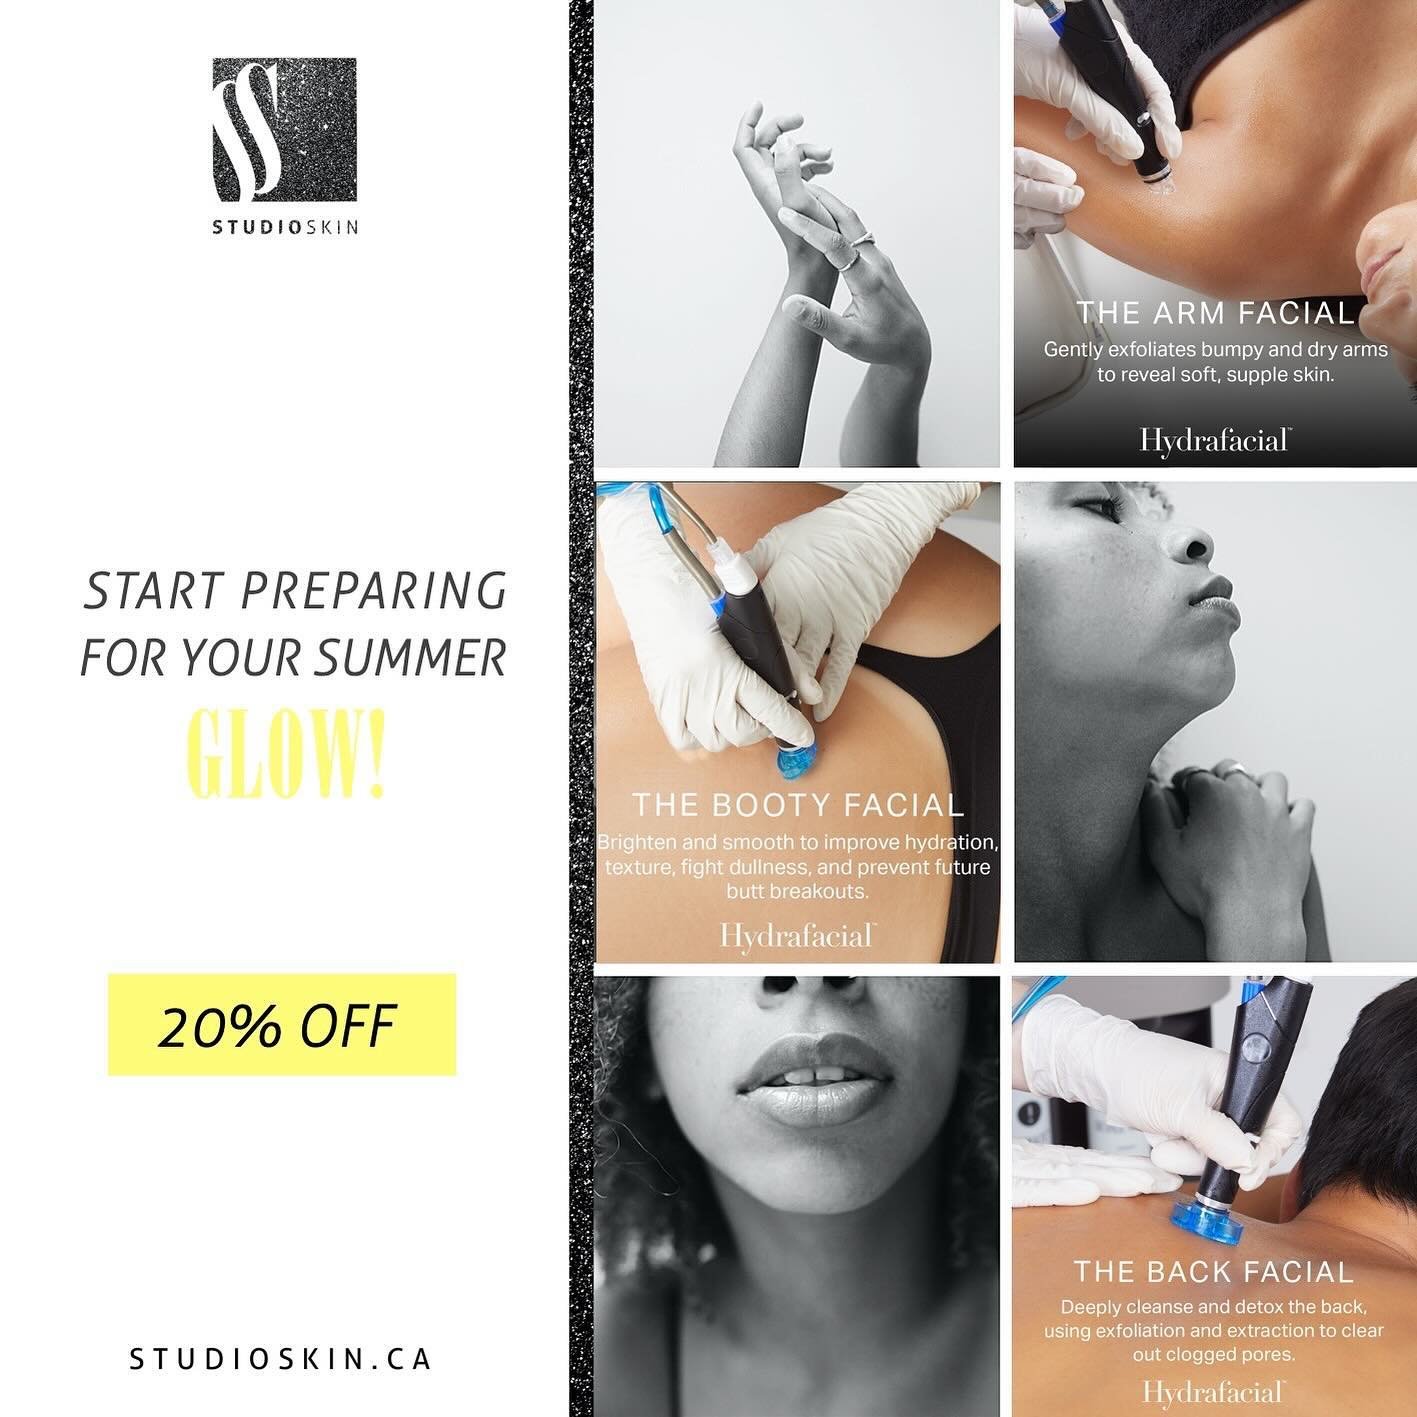 🚨PROMO! 
Get ready to shine this summer with our Hydrafacial&rsquo;s! Say goodbye to dullness and hello to radiant, luminous skin. Transform your complexion and unleash your inner glow with our specially curated HydraFacial treatments for the face a